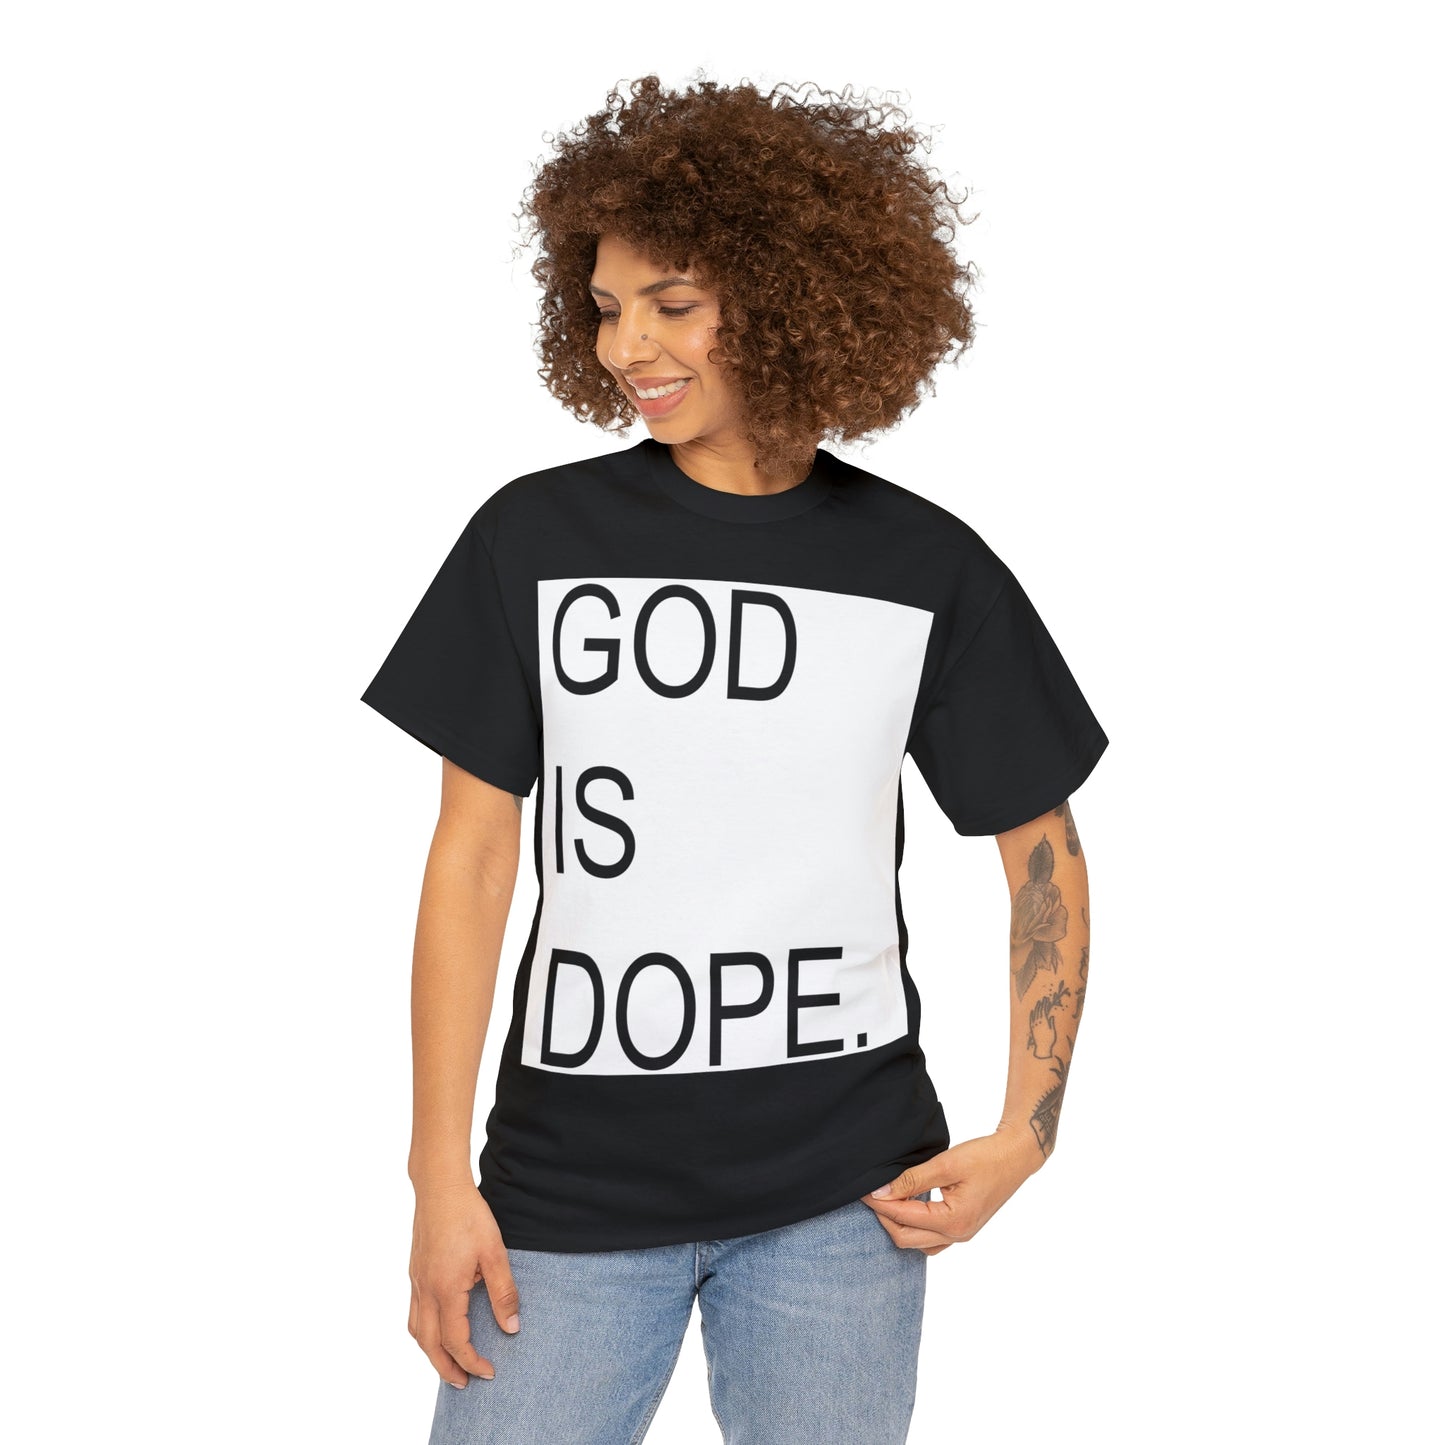 God Is Dope Shirt - Up to 5X